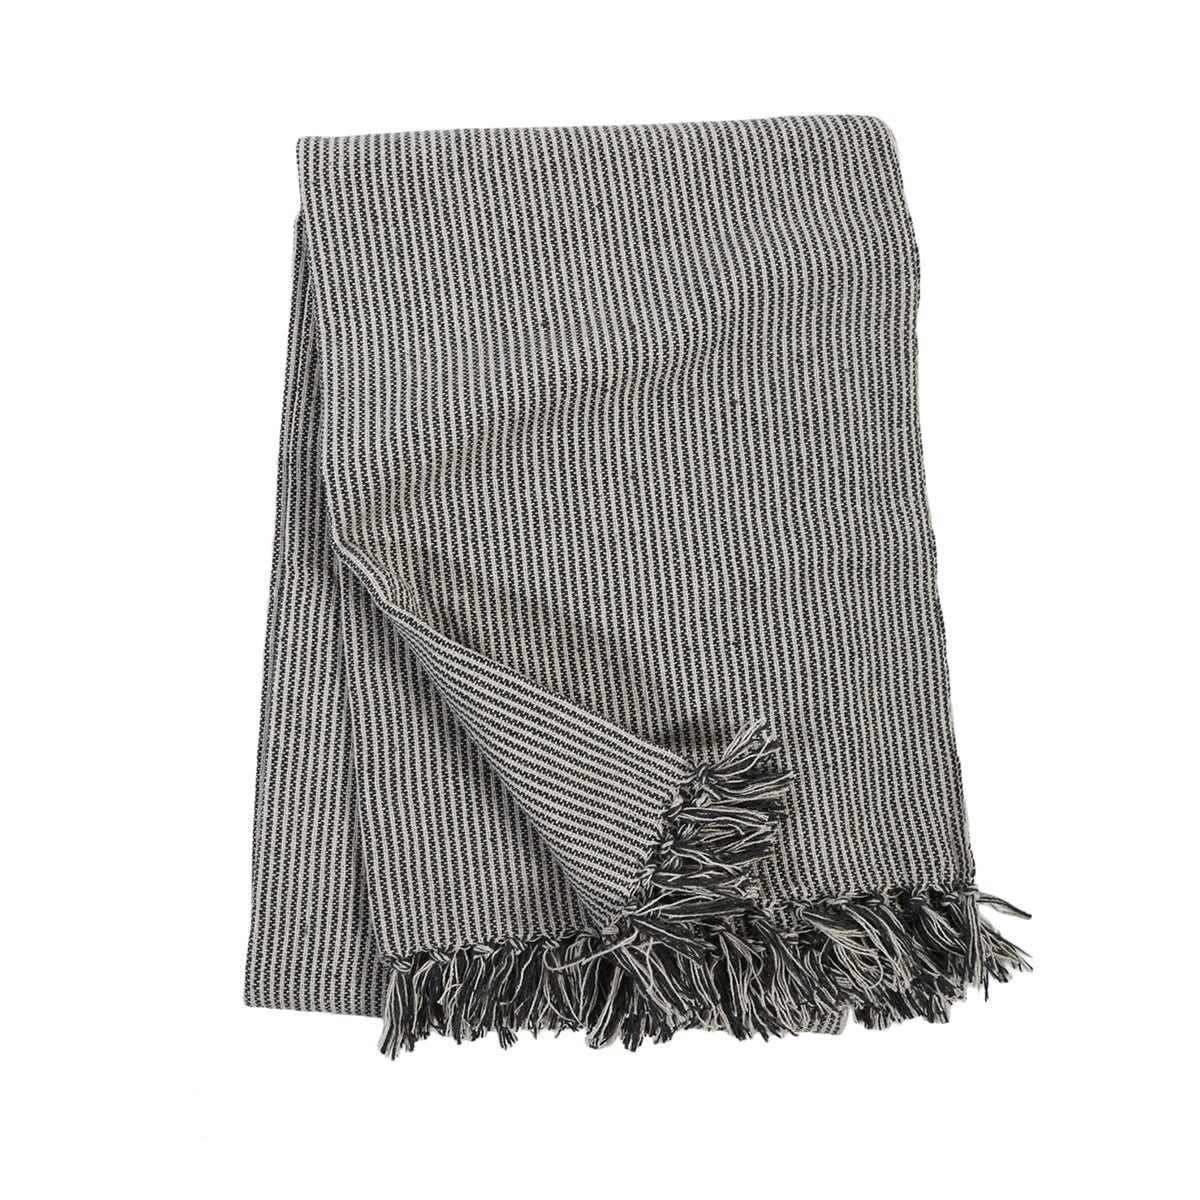 JAMES OVERSIZED THROW - Ivory/Charcoal-Pom Pom at Home